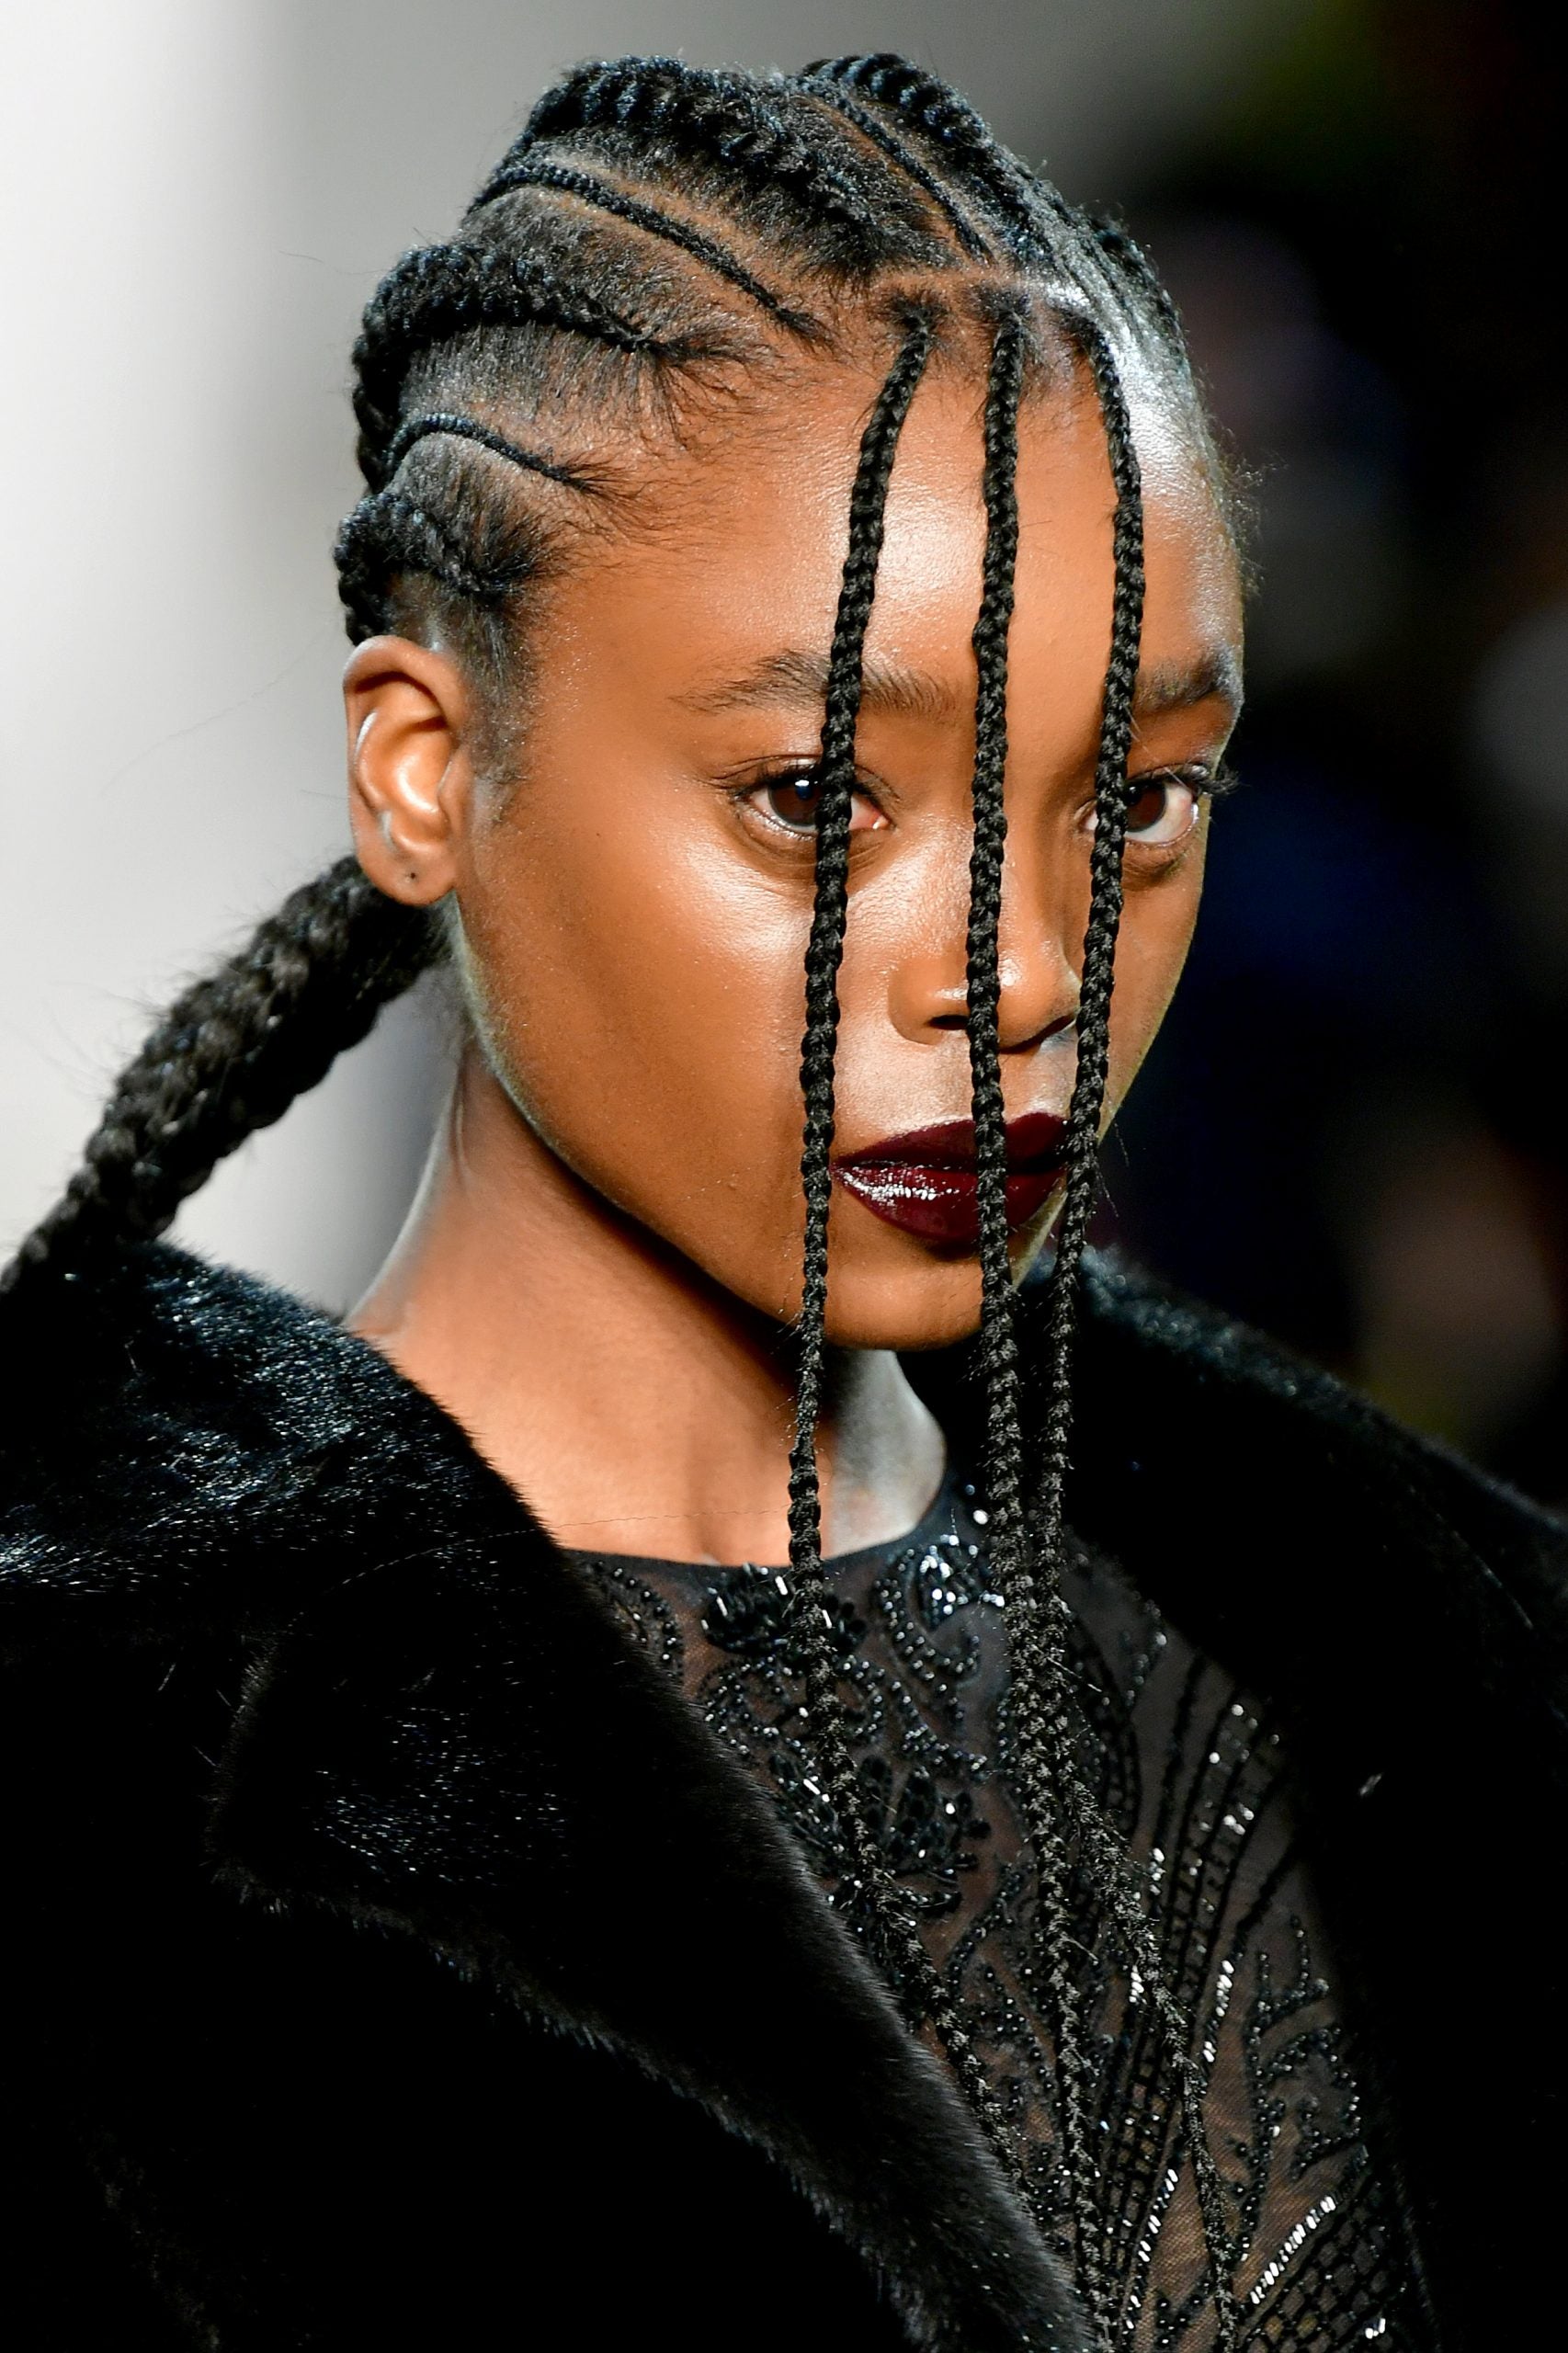 The Hairstyles At LaQuan Smith’s Show Invokes Hip Hop And R&B Legends